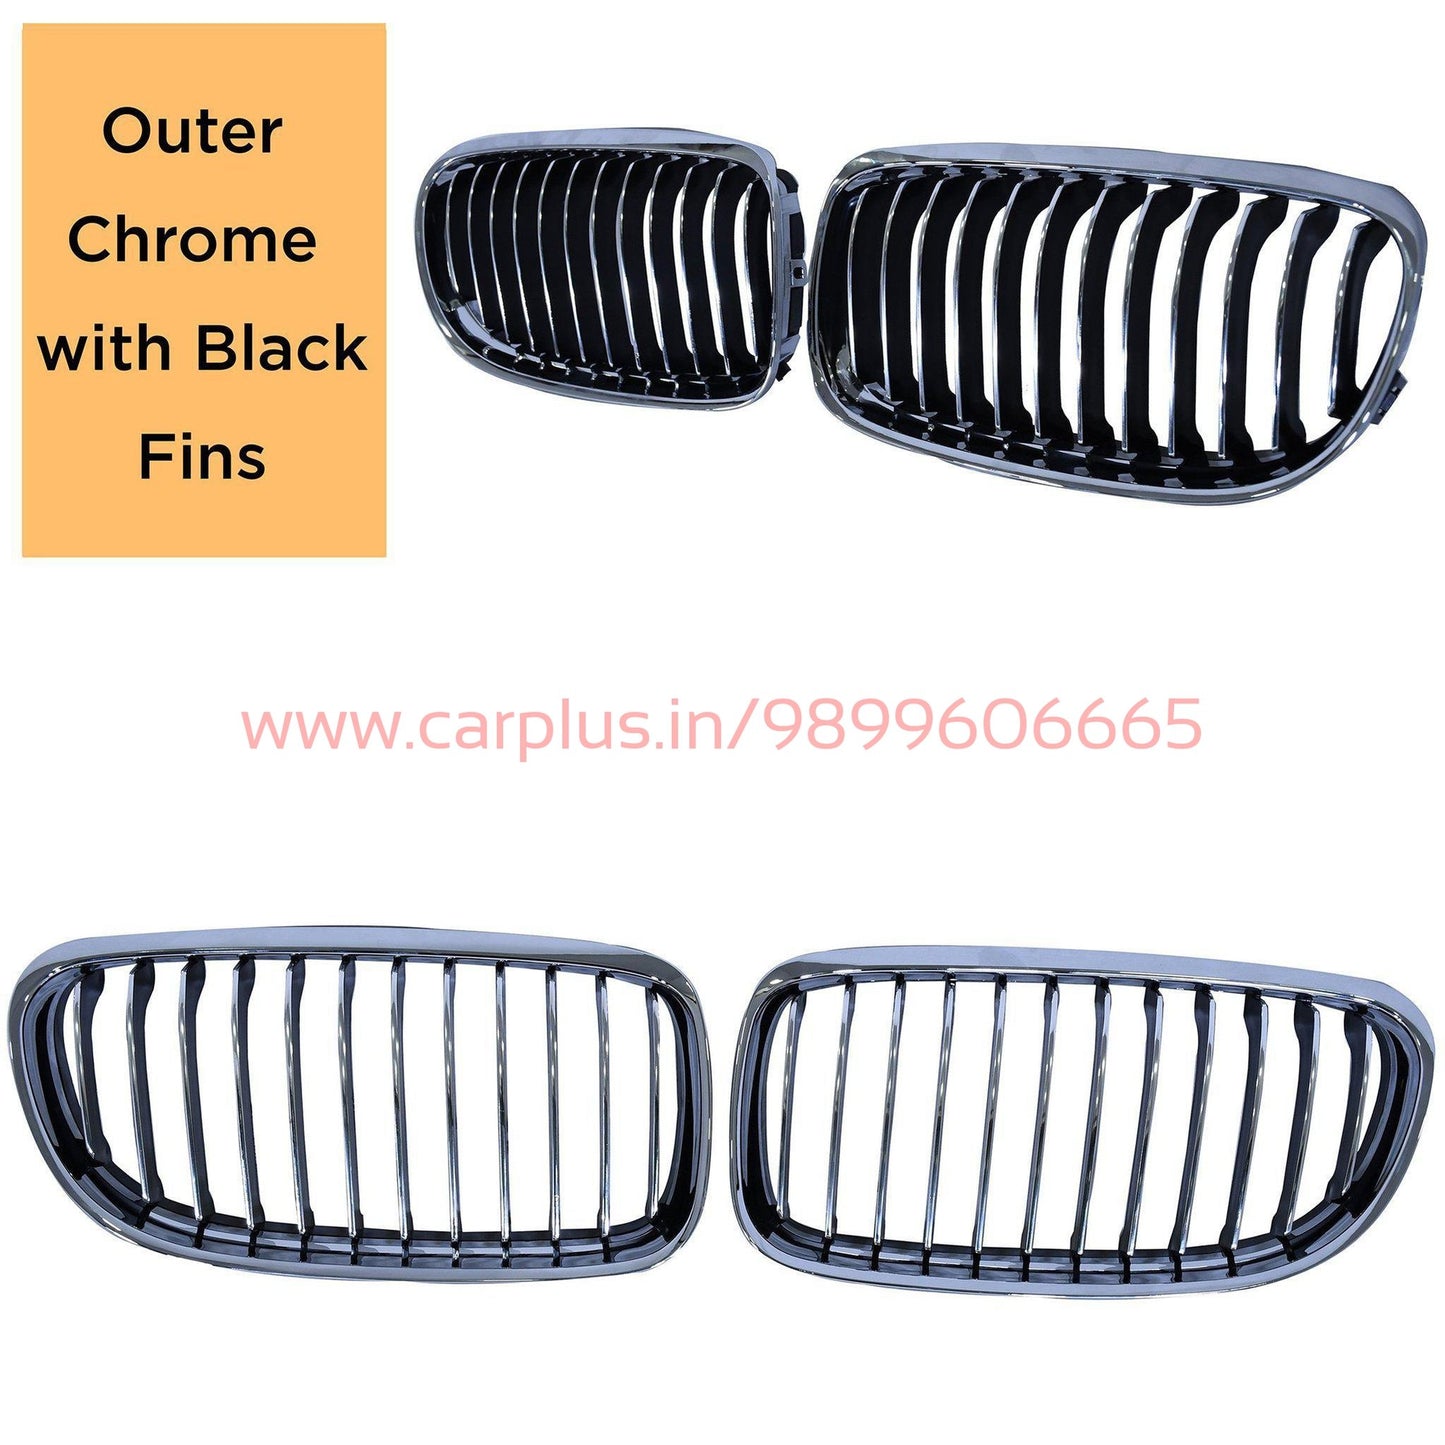 
                  
                    KMH Front Grill for BMW 3 Series E90 KMH-GRILL GRILLS.
                  
                